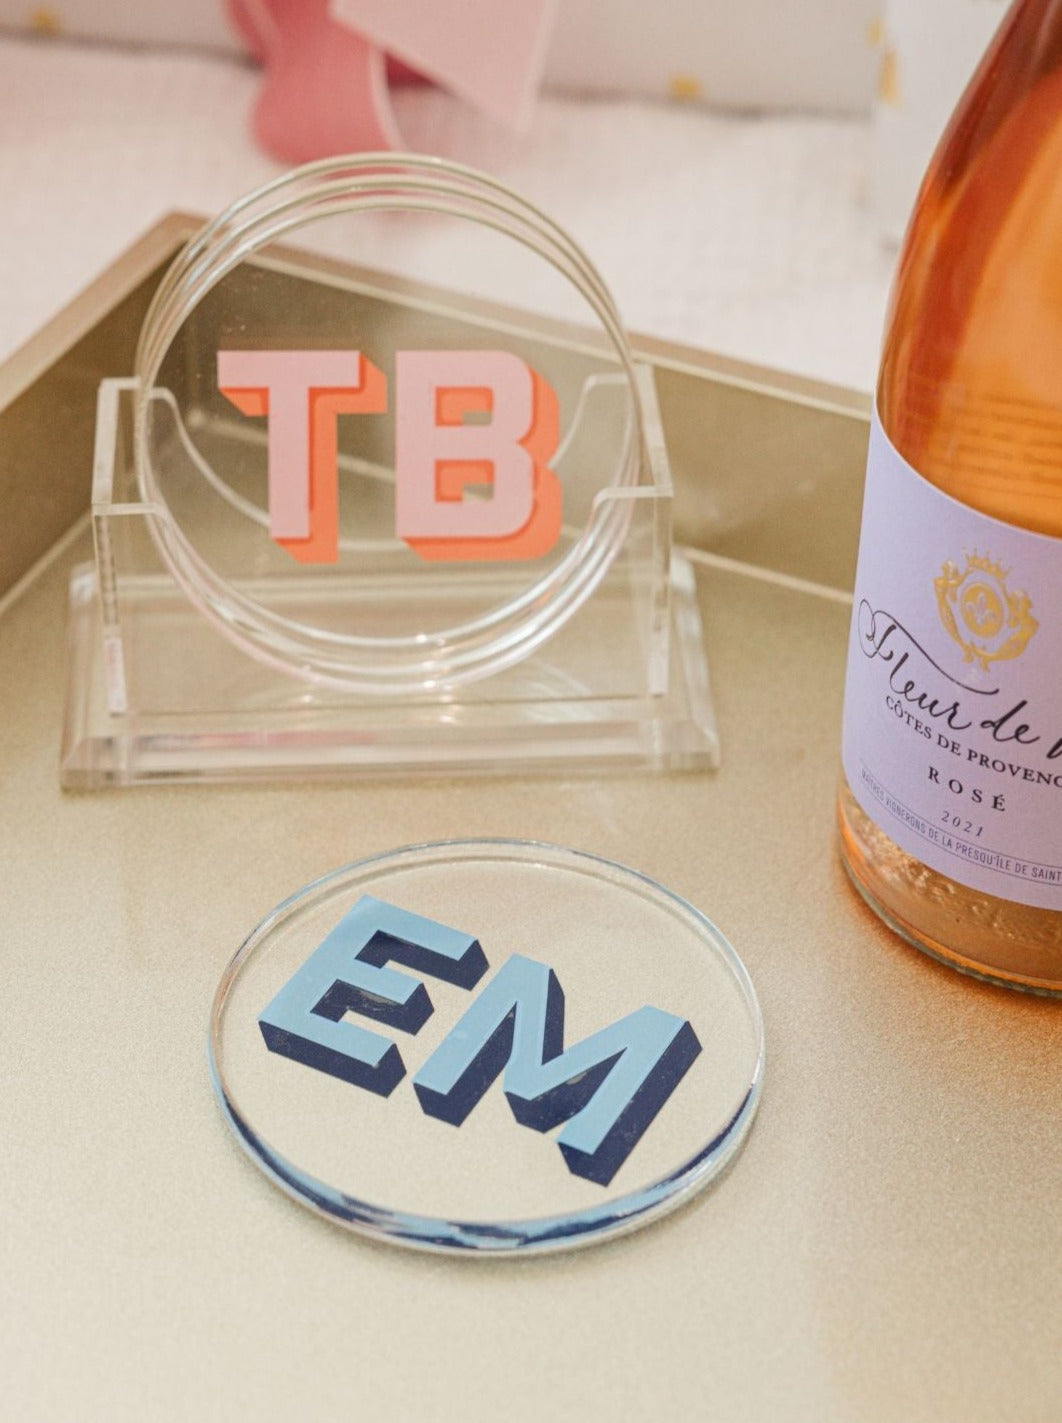 A set of coasters sits in a holder showing off it's custom pink monogram.